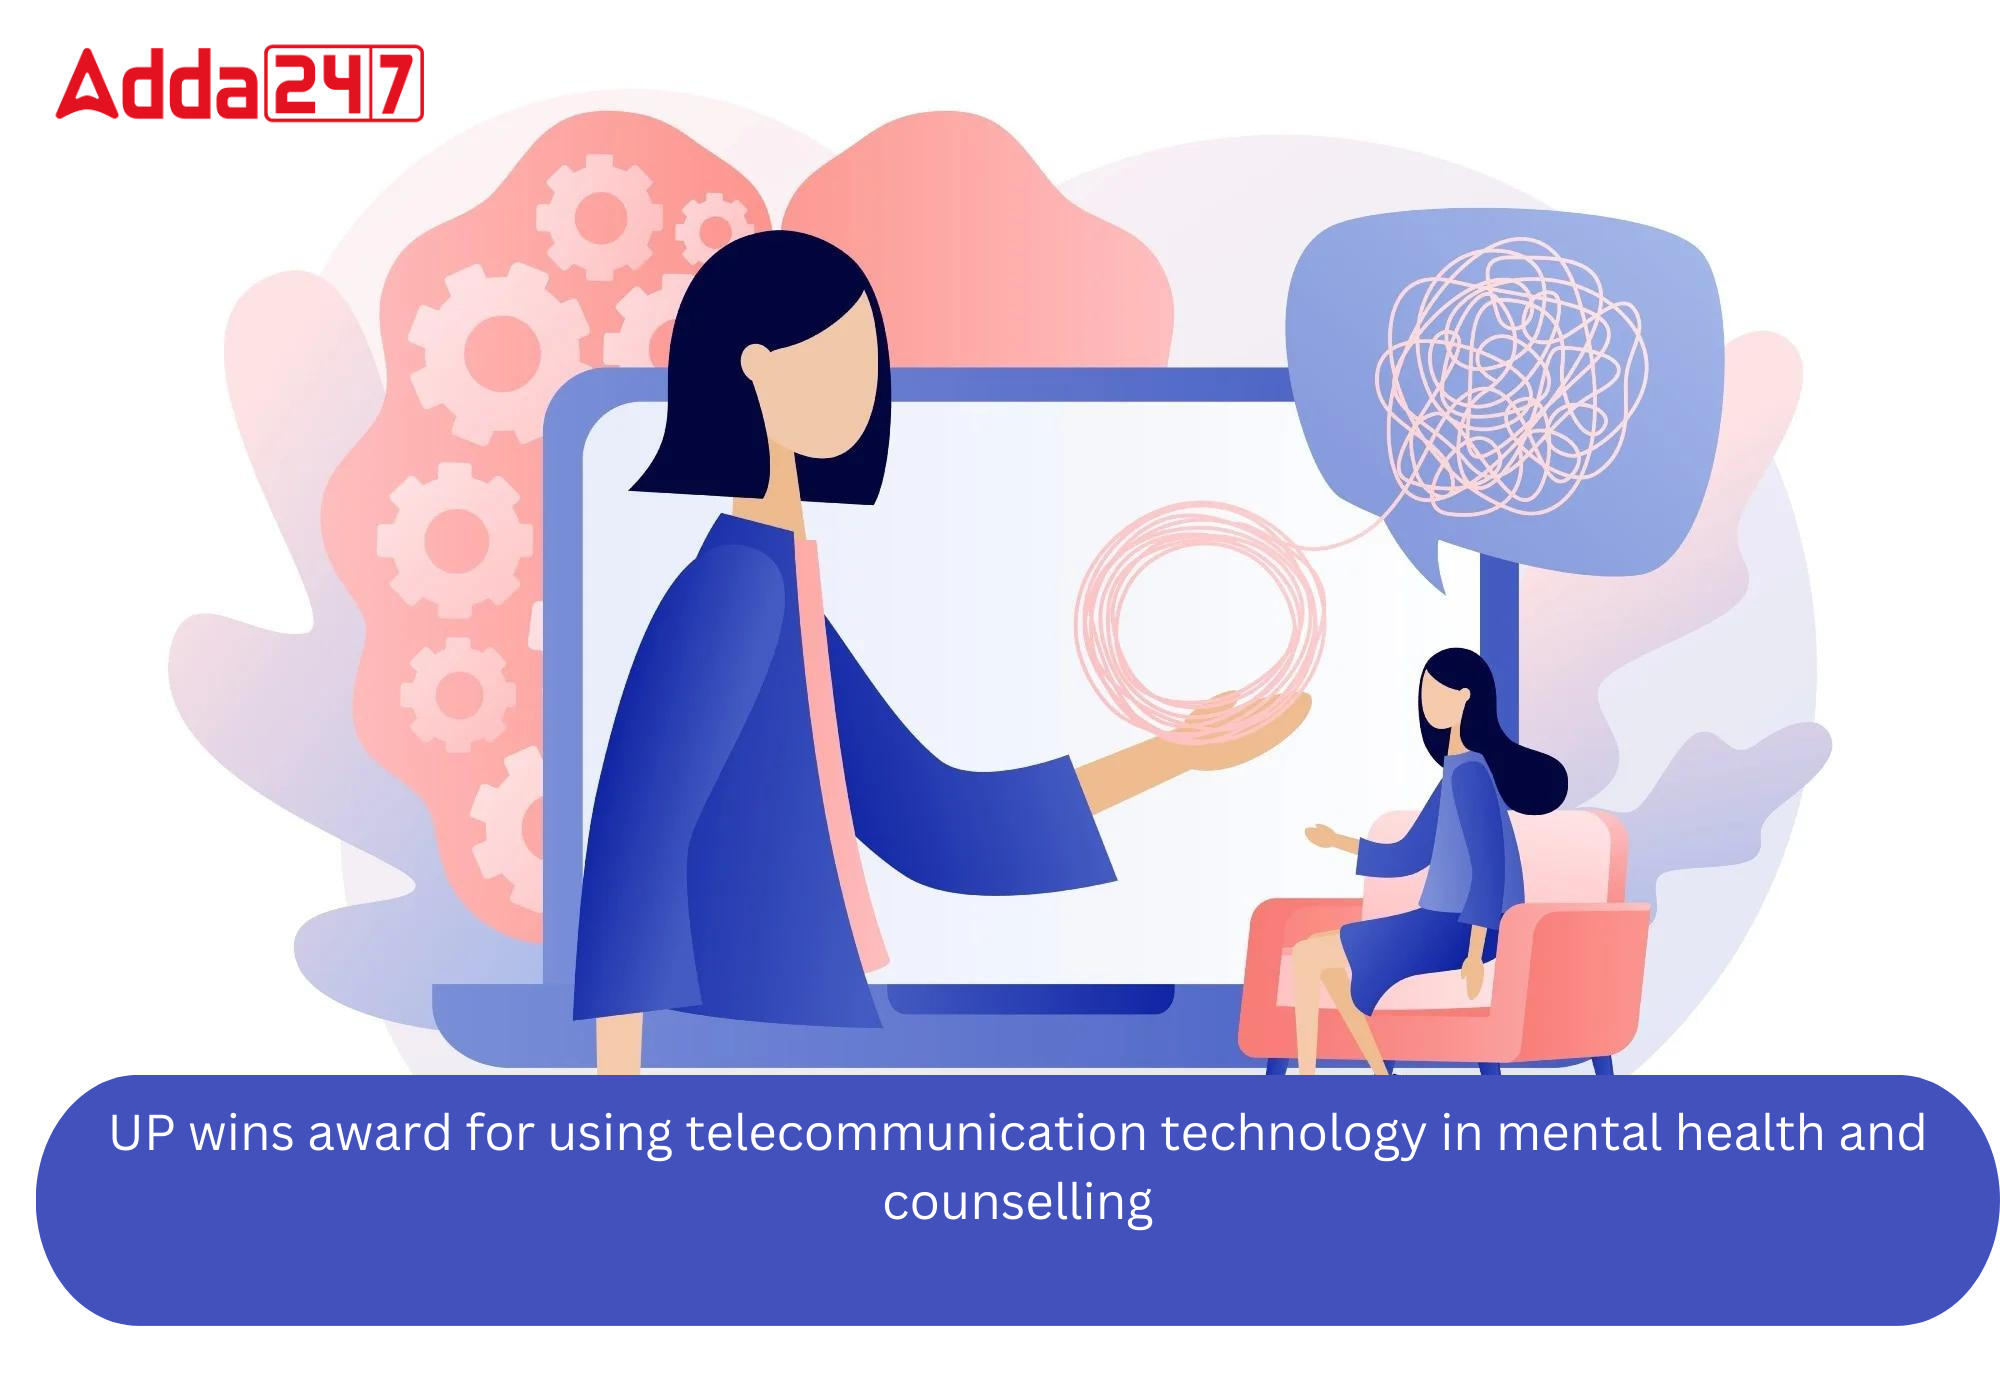 UP wins award for using telecommunication technology in mental health and counselling